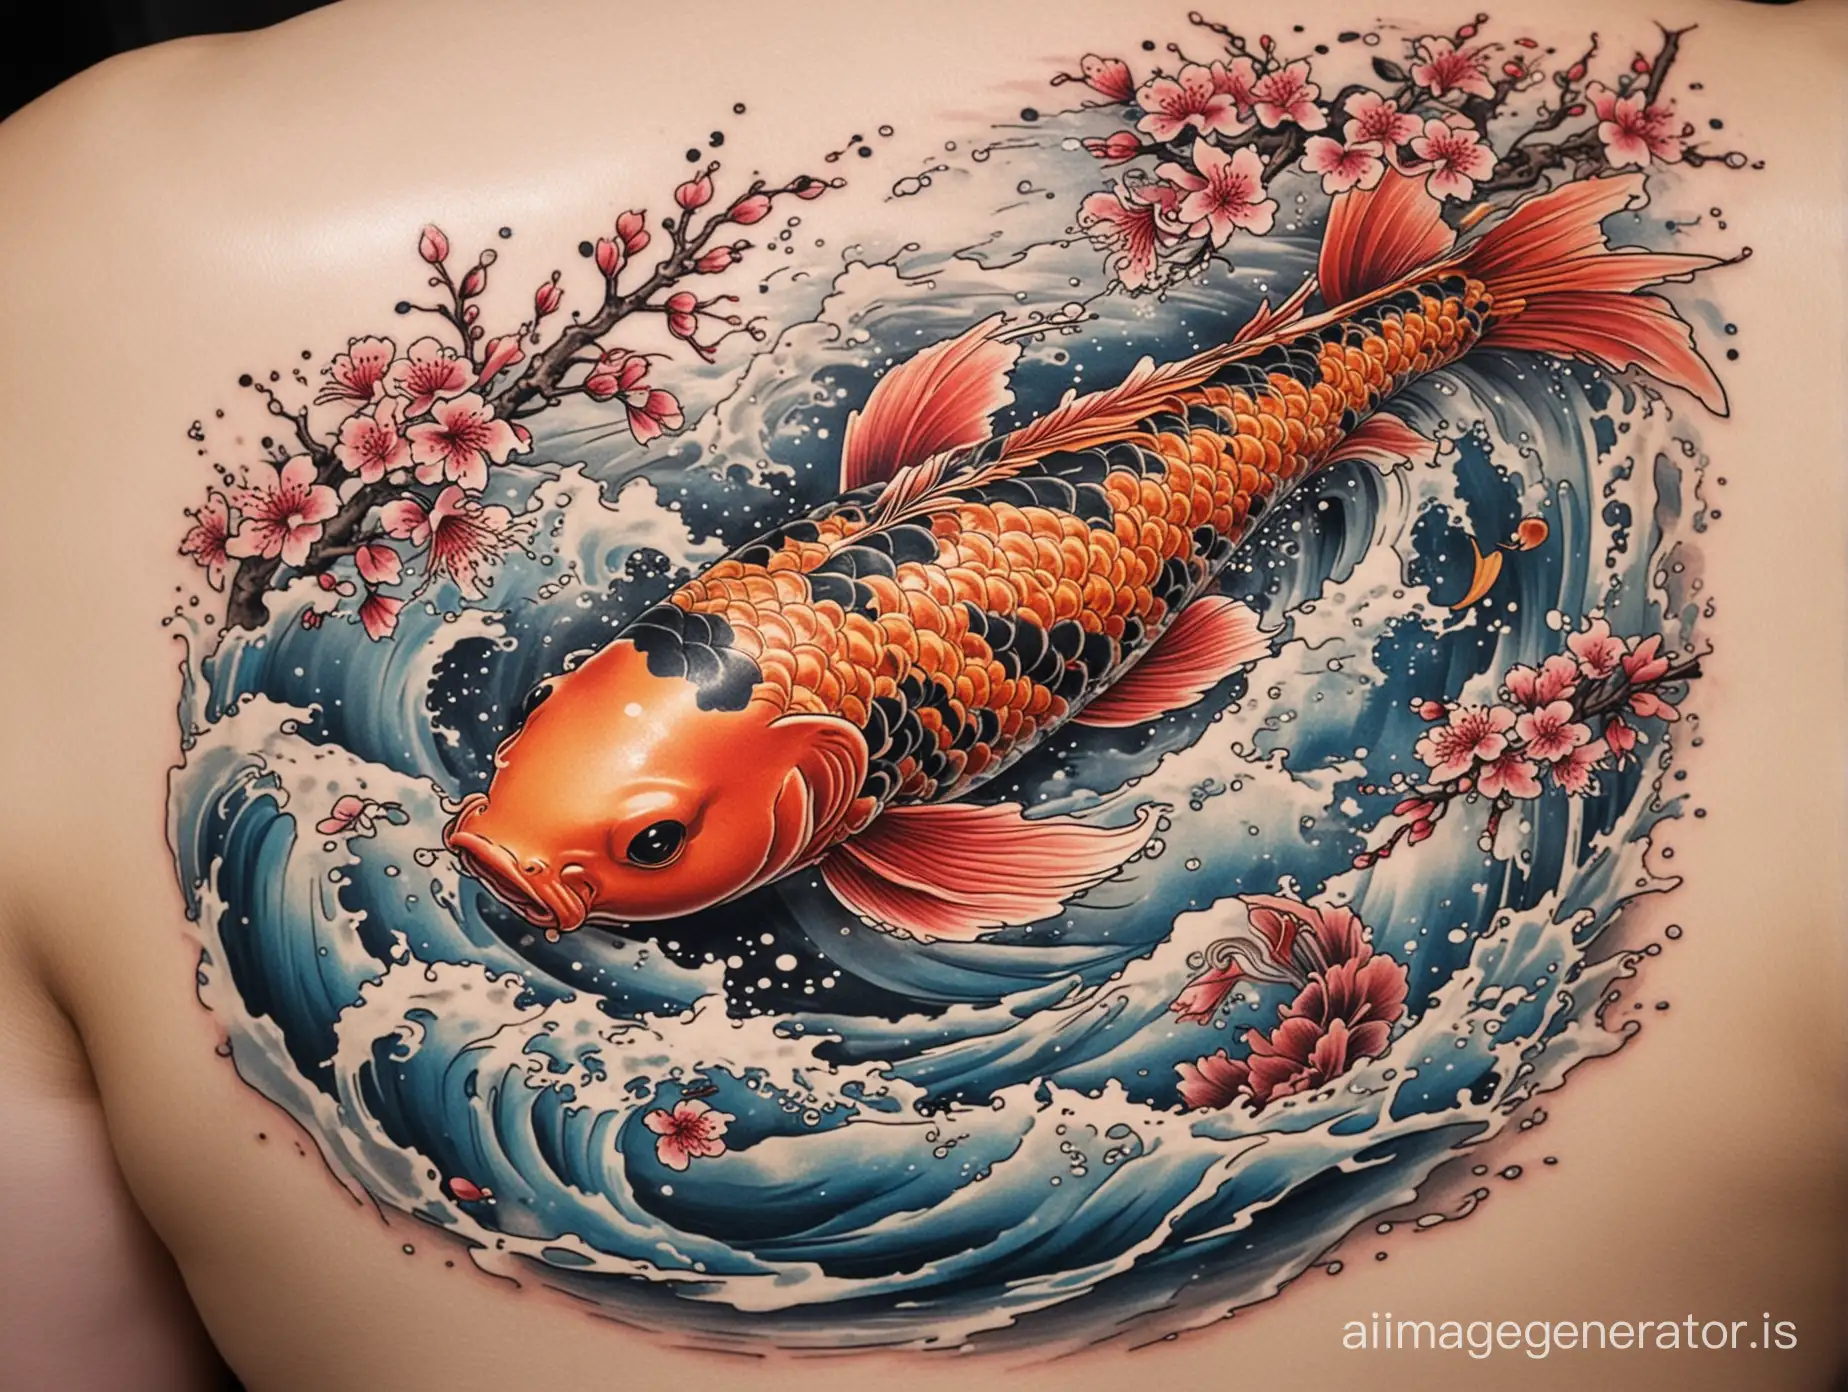 A Japanese irezumi tattoo, showcasing a koi fish swimming upstream amidst swirling waters and cherry blossoms on the shore.